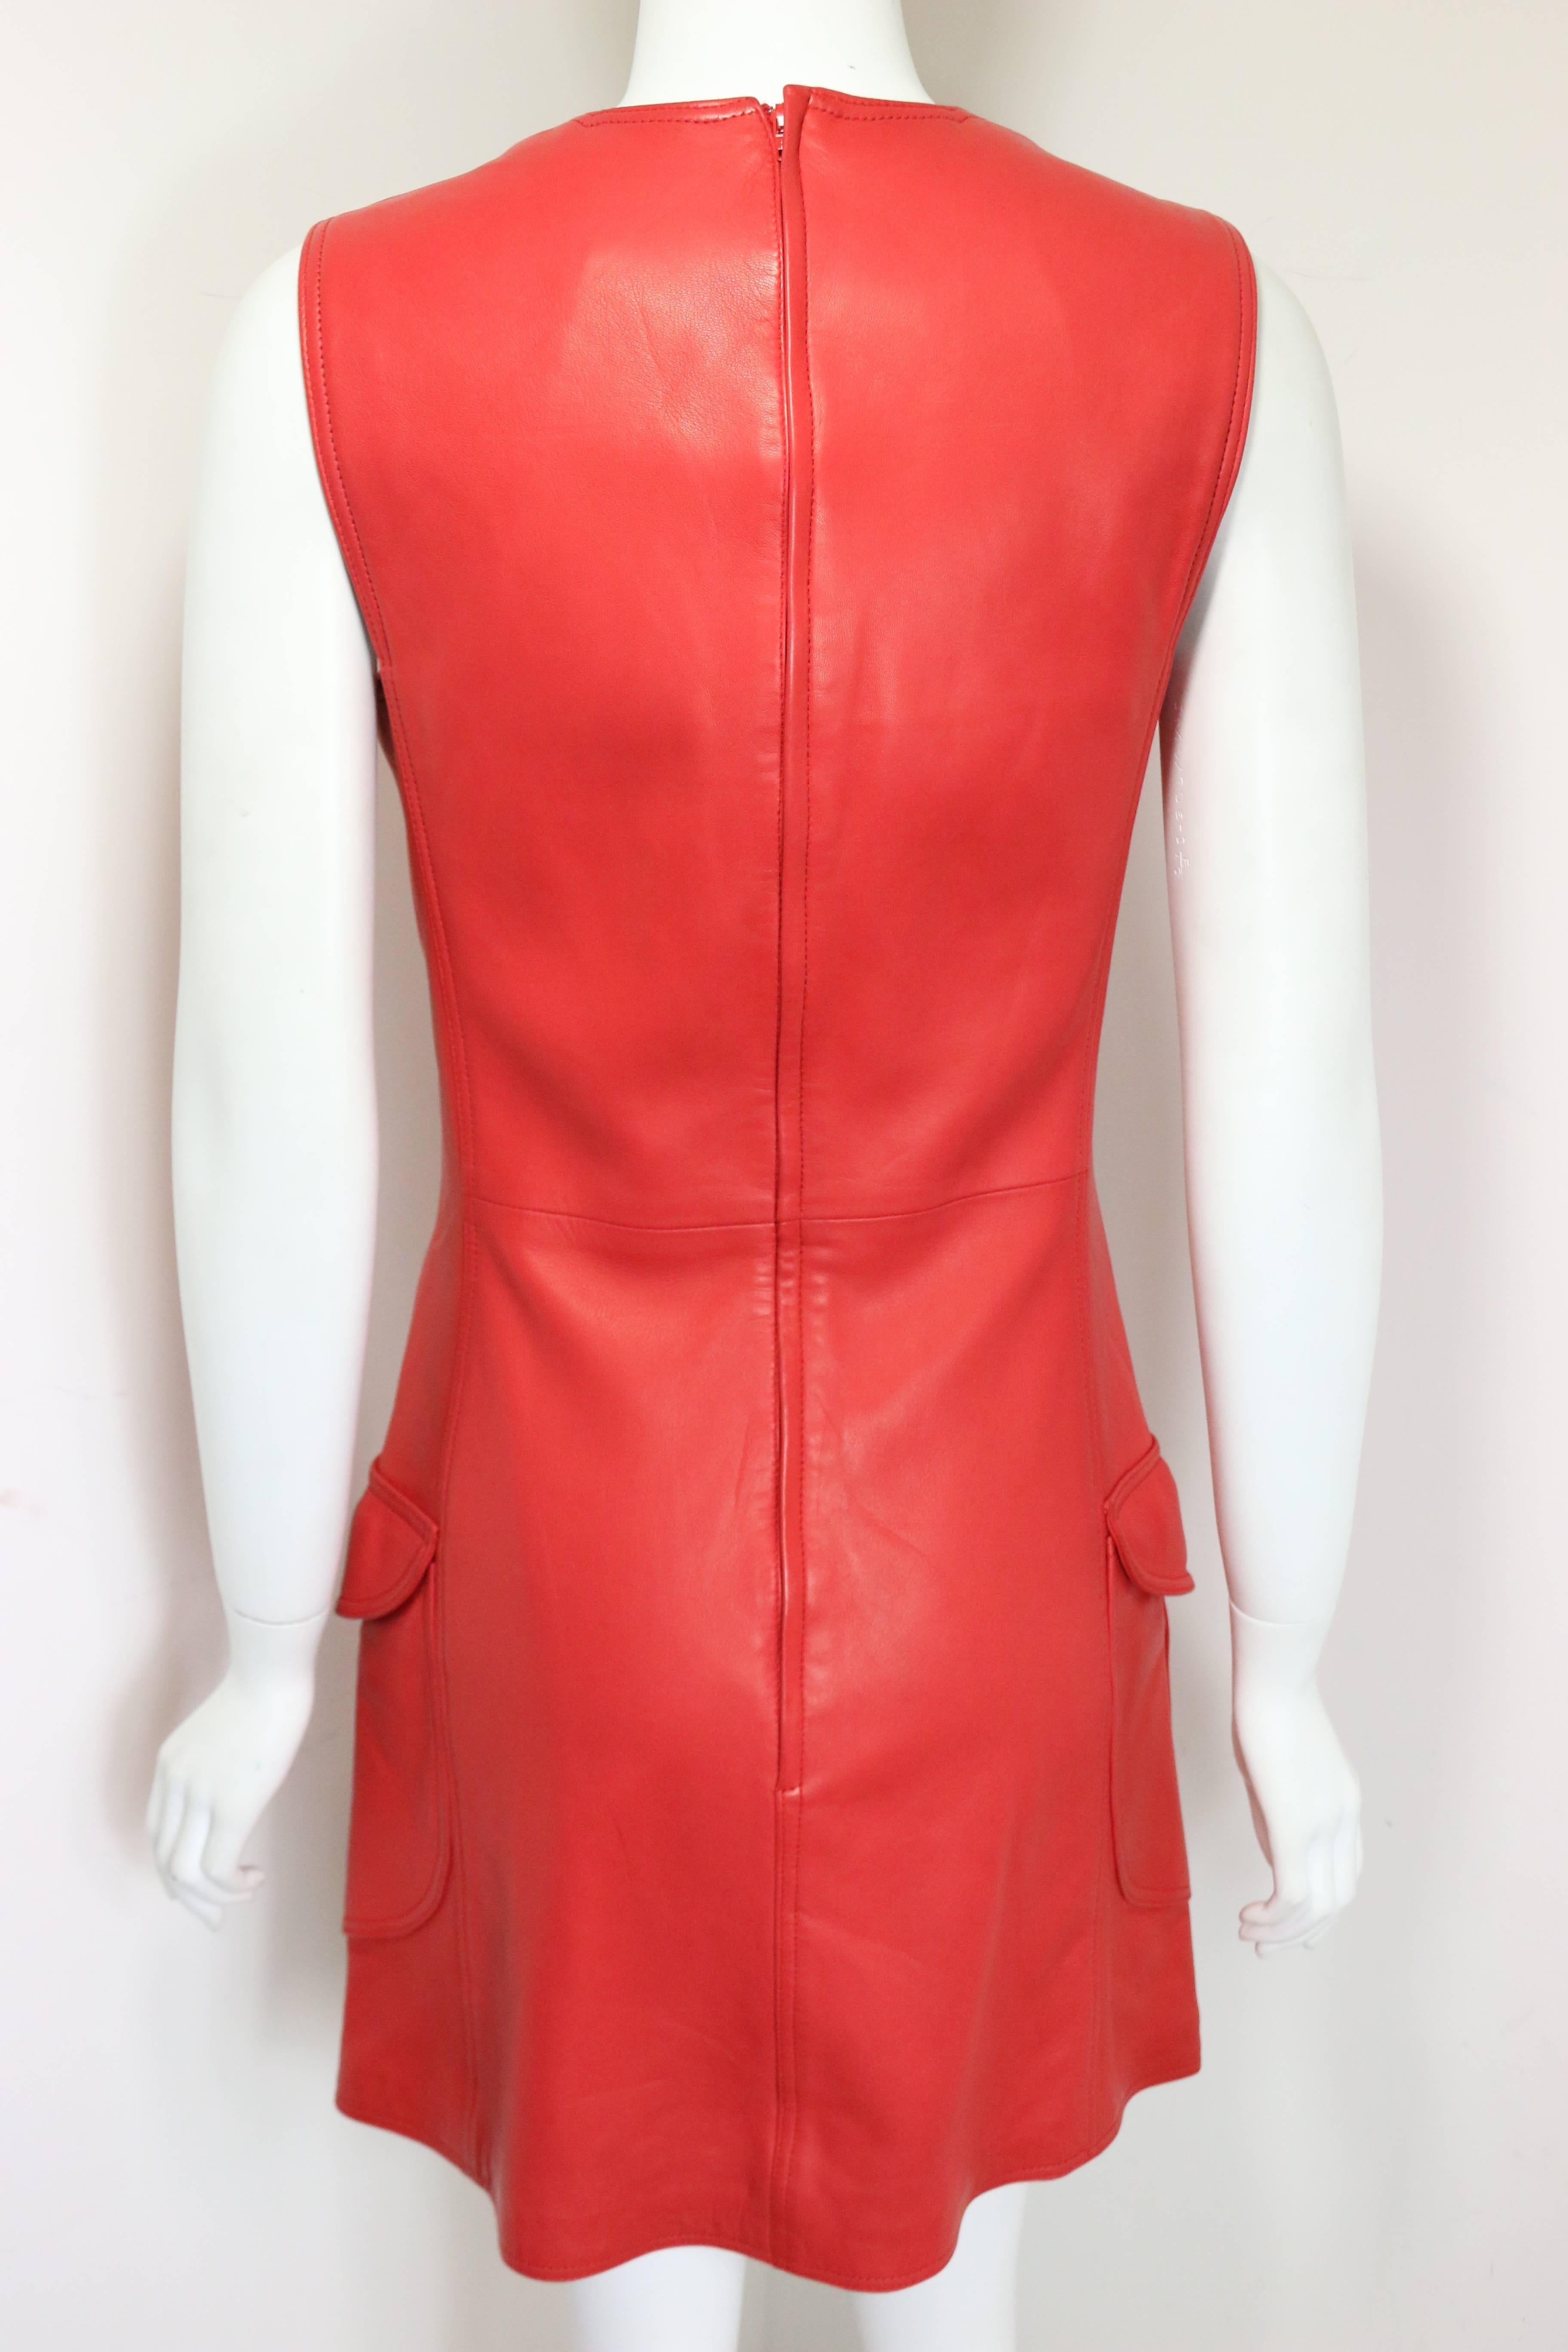 - Vintage 90s Gianni Versace red leather dress.   

- Featuring four flap pockets with signature red medusa buttons.   

- Back zipper closure.   

- Made in Italy.   

- Size 40.   

- Length: 33 inches. Bust: 32 inches. Waist: 30inches. 